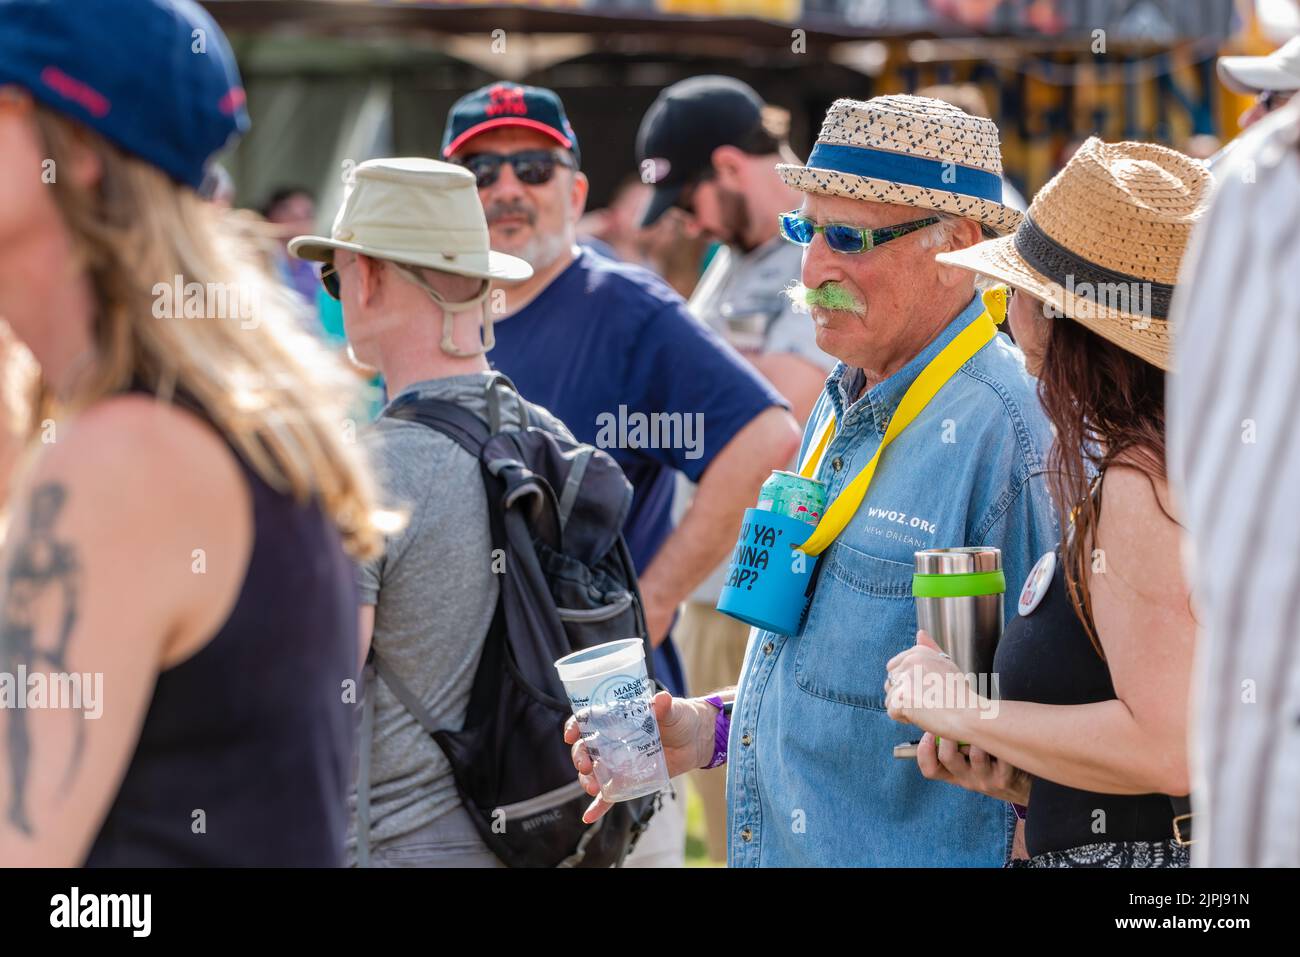 NEW ORLEANS, LA, USA - MARCH 30, 2019: Baby boomer with green mustache selectively focused among the crowd at an outdoor festival Stock Photo